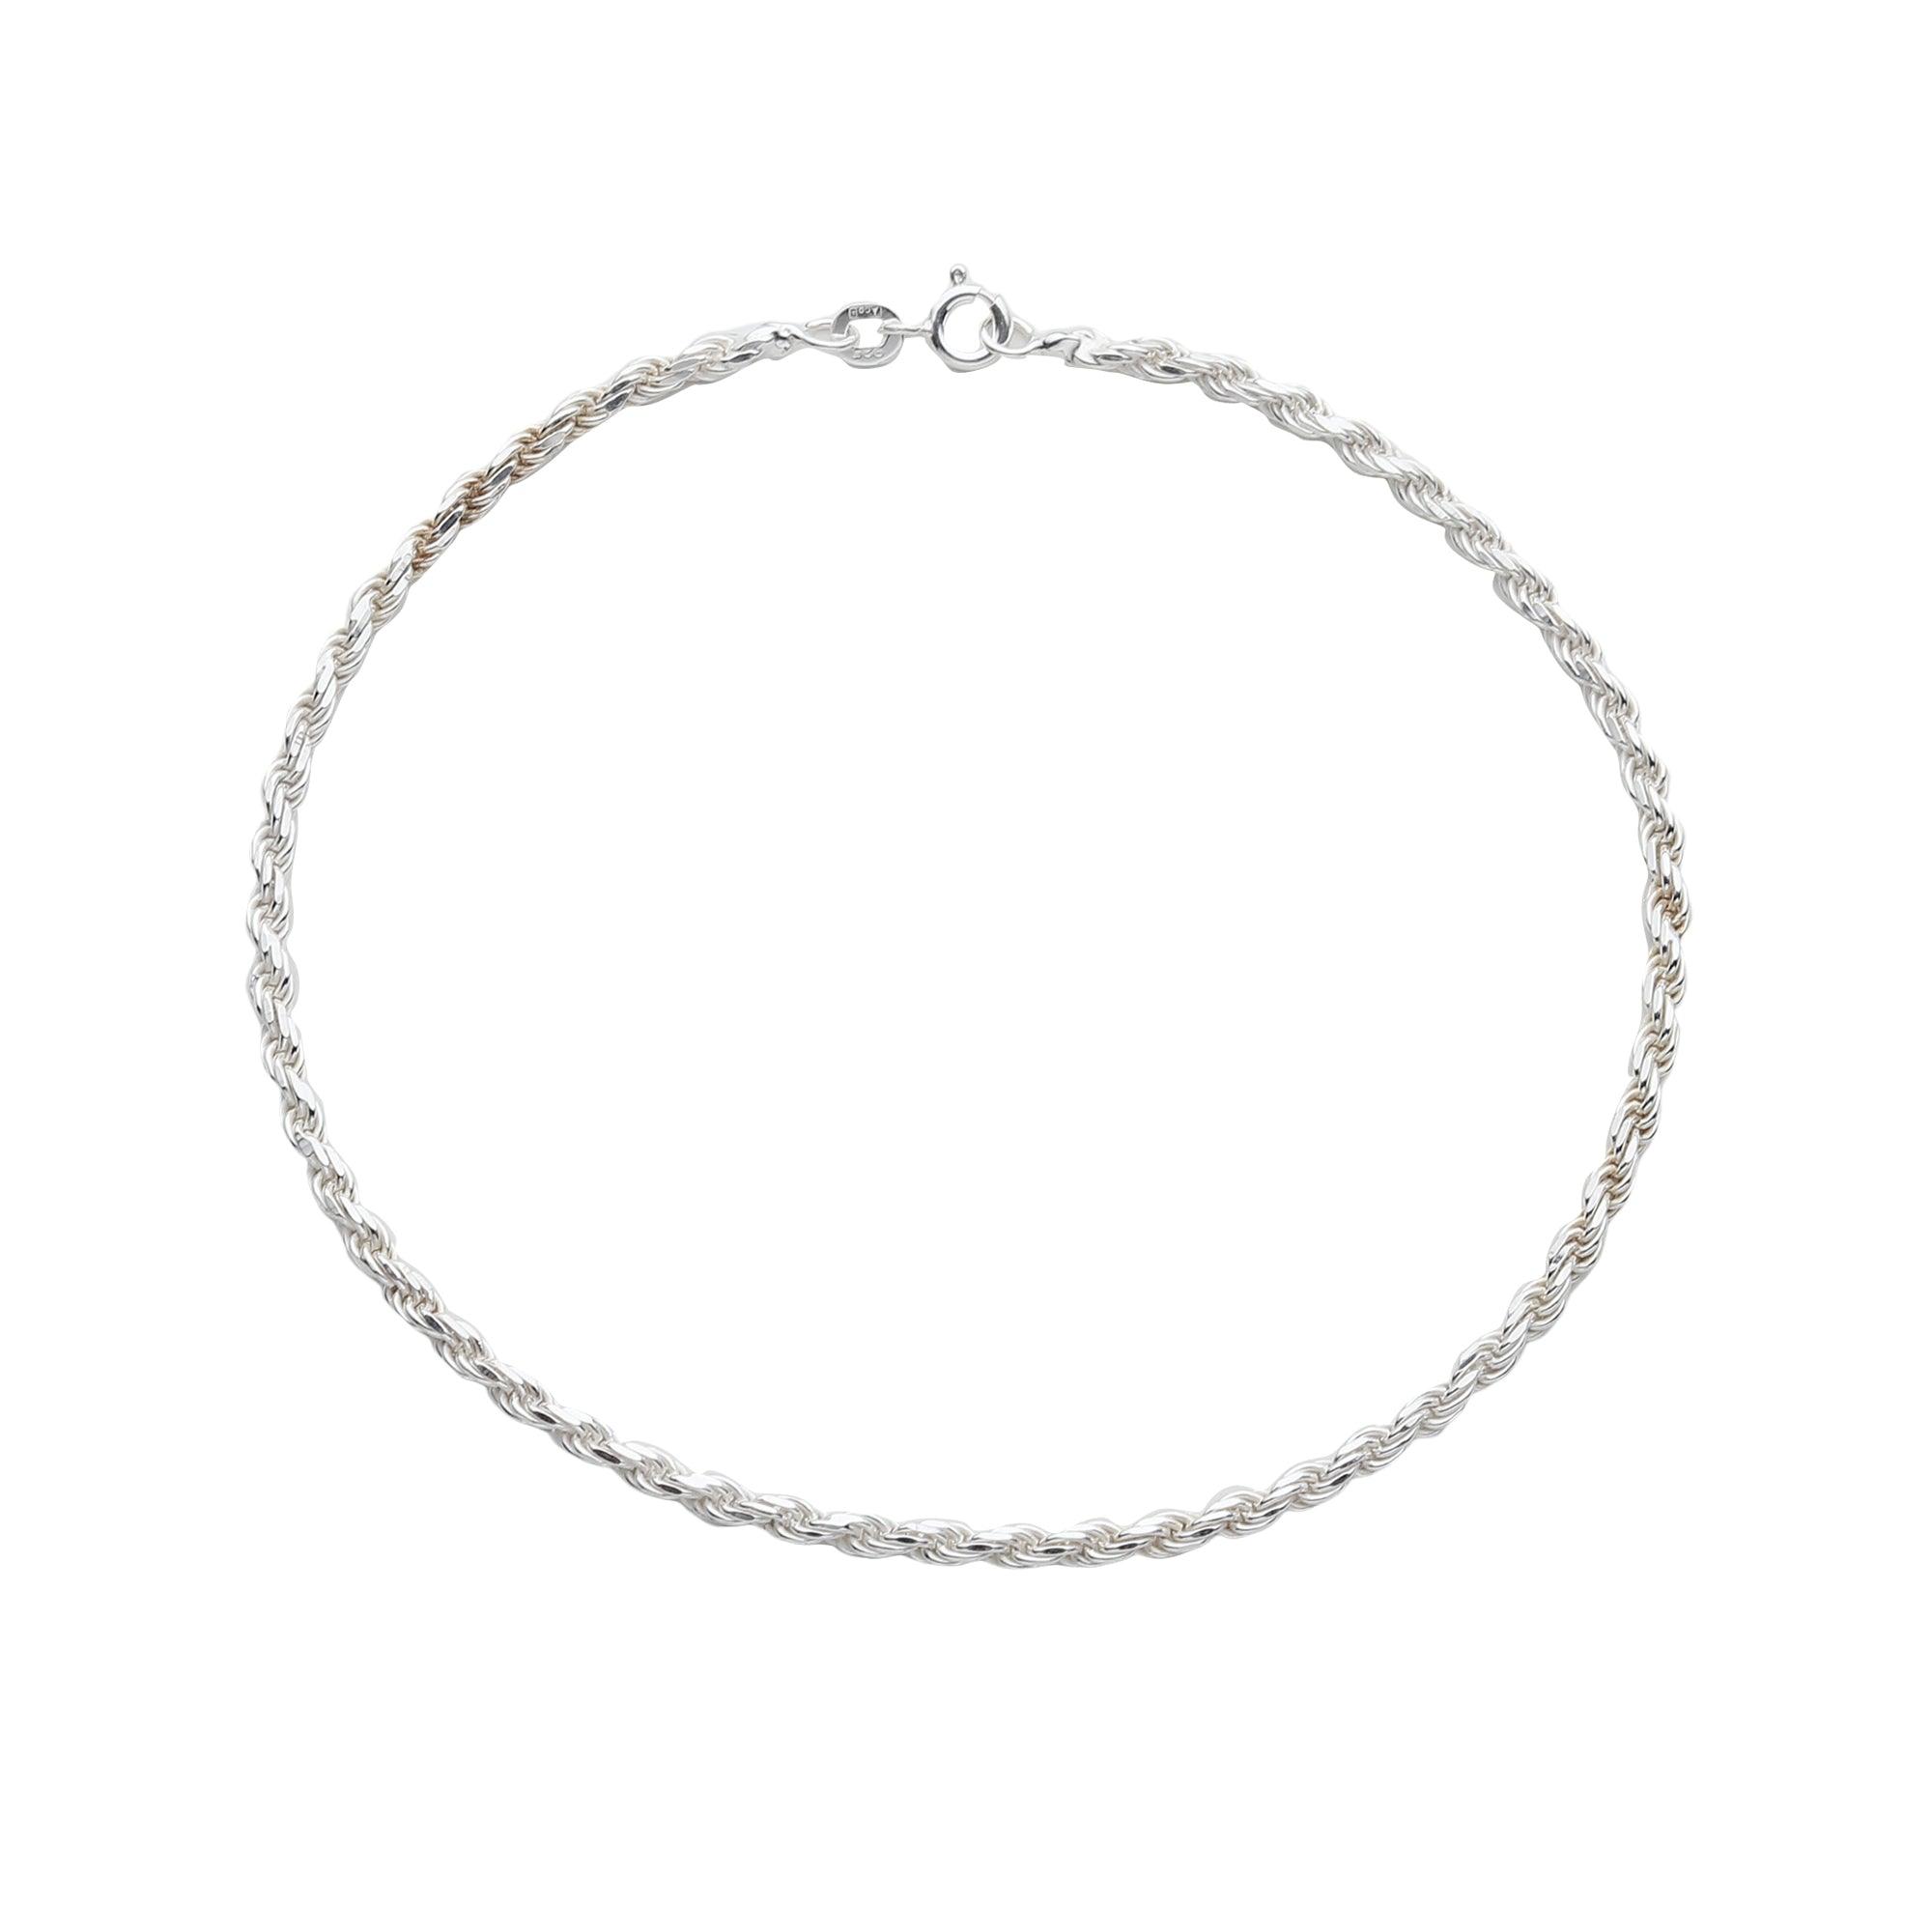 Unique Twisted Chain Shiny Anklet - silvermark